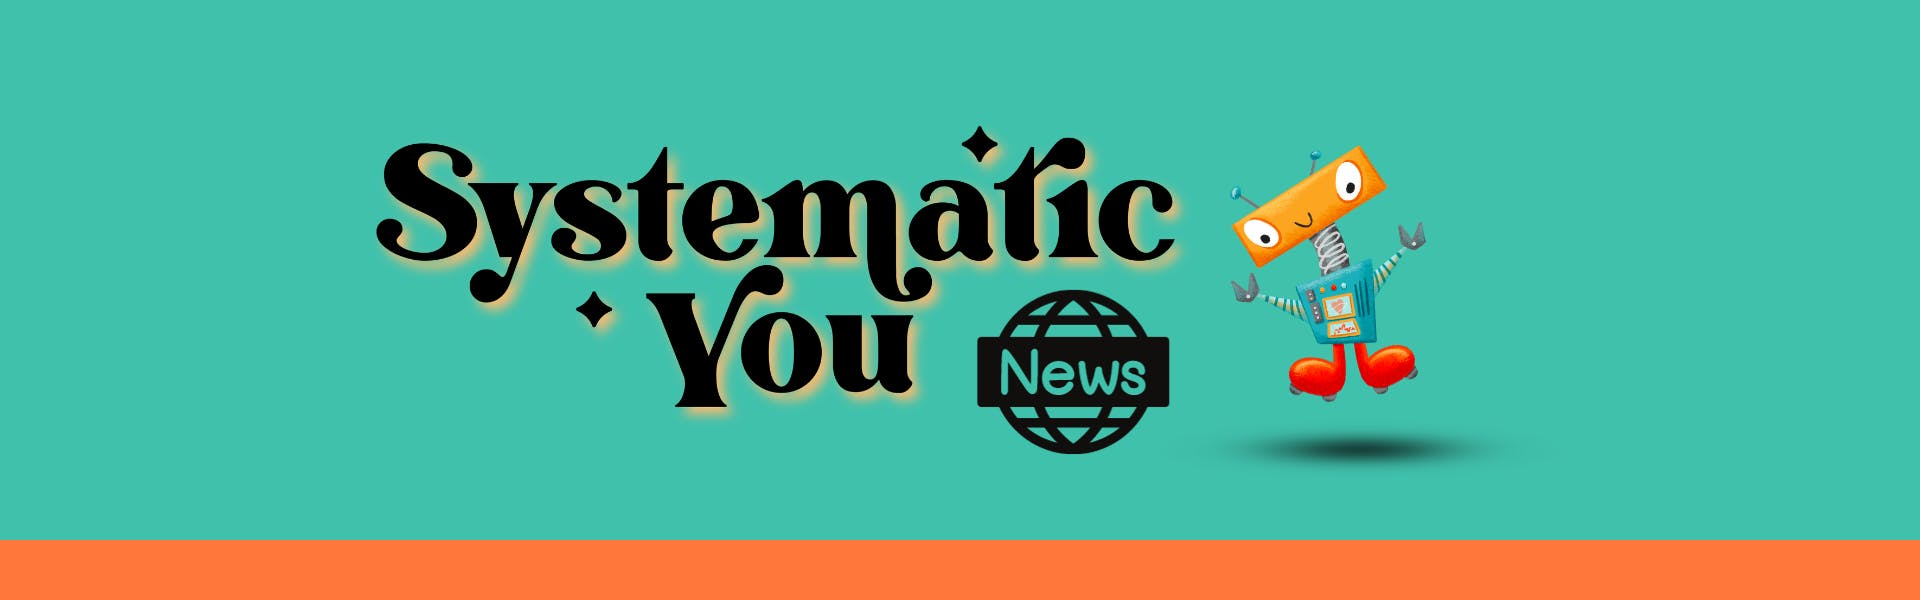 Header Image of Systematic You News